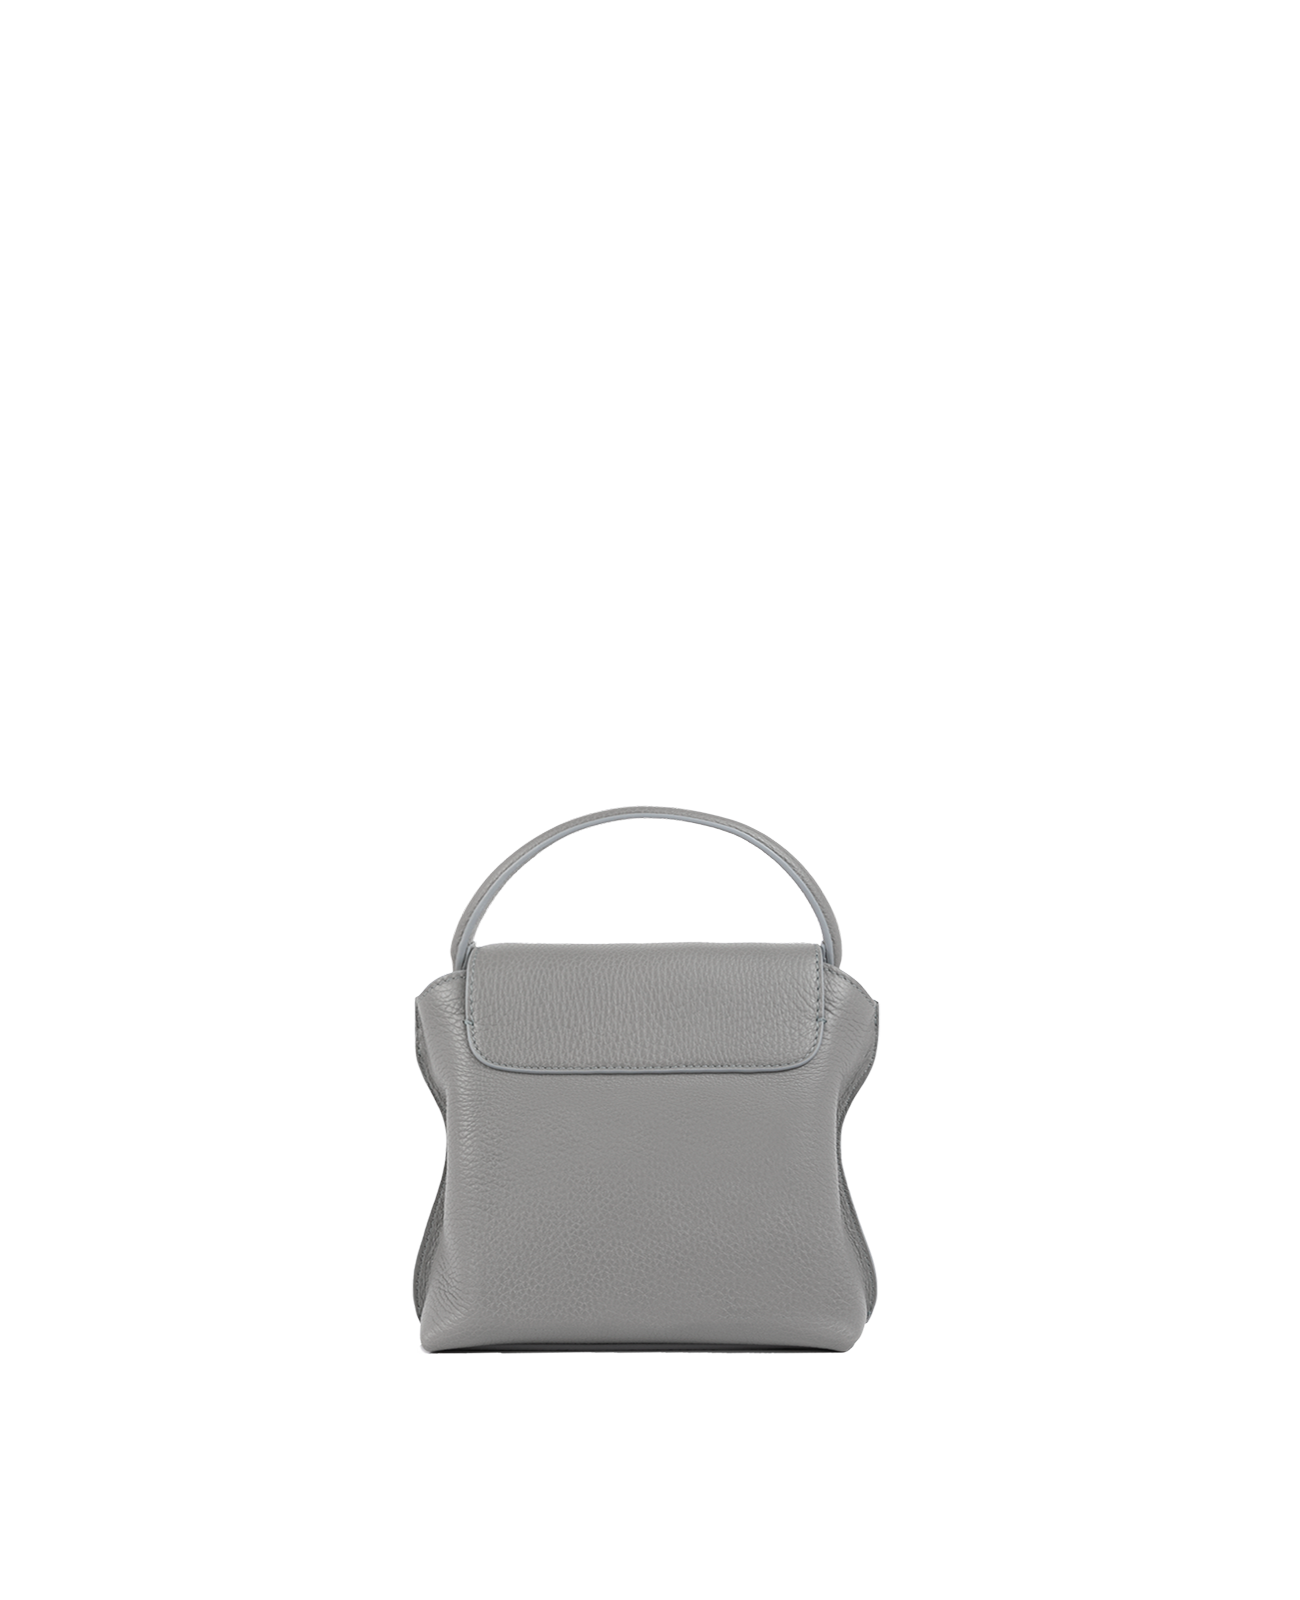 Cross-body bag in Italian full-grain leather, semi-aniline calf Italian leather with detachable shoulder strap.Three compartments, zip pocket in the back compartment. Magnetic flap closure with logo. Color: Gray. Size: Mini.